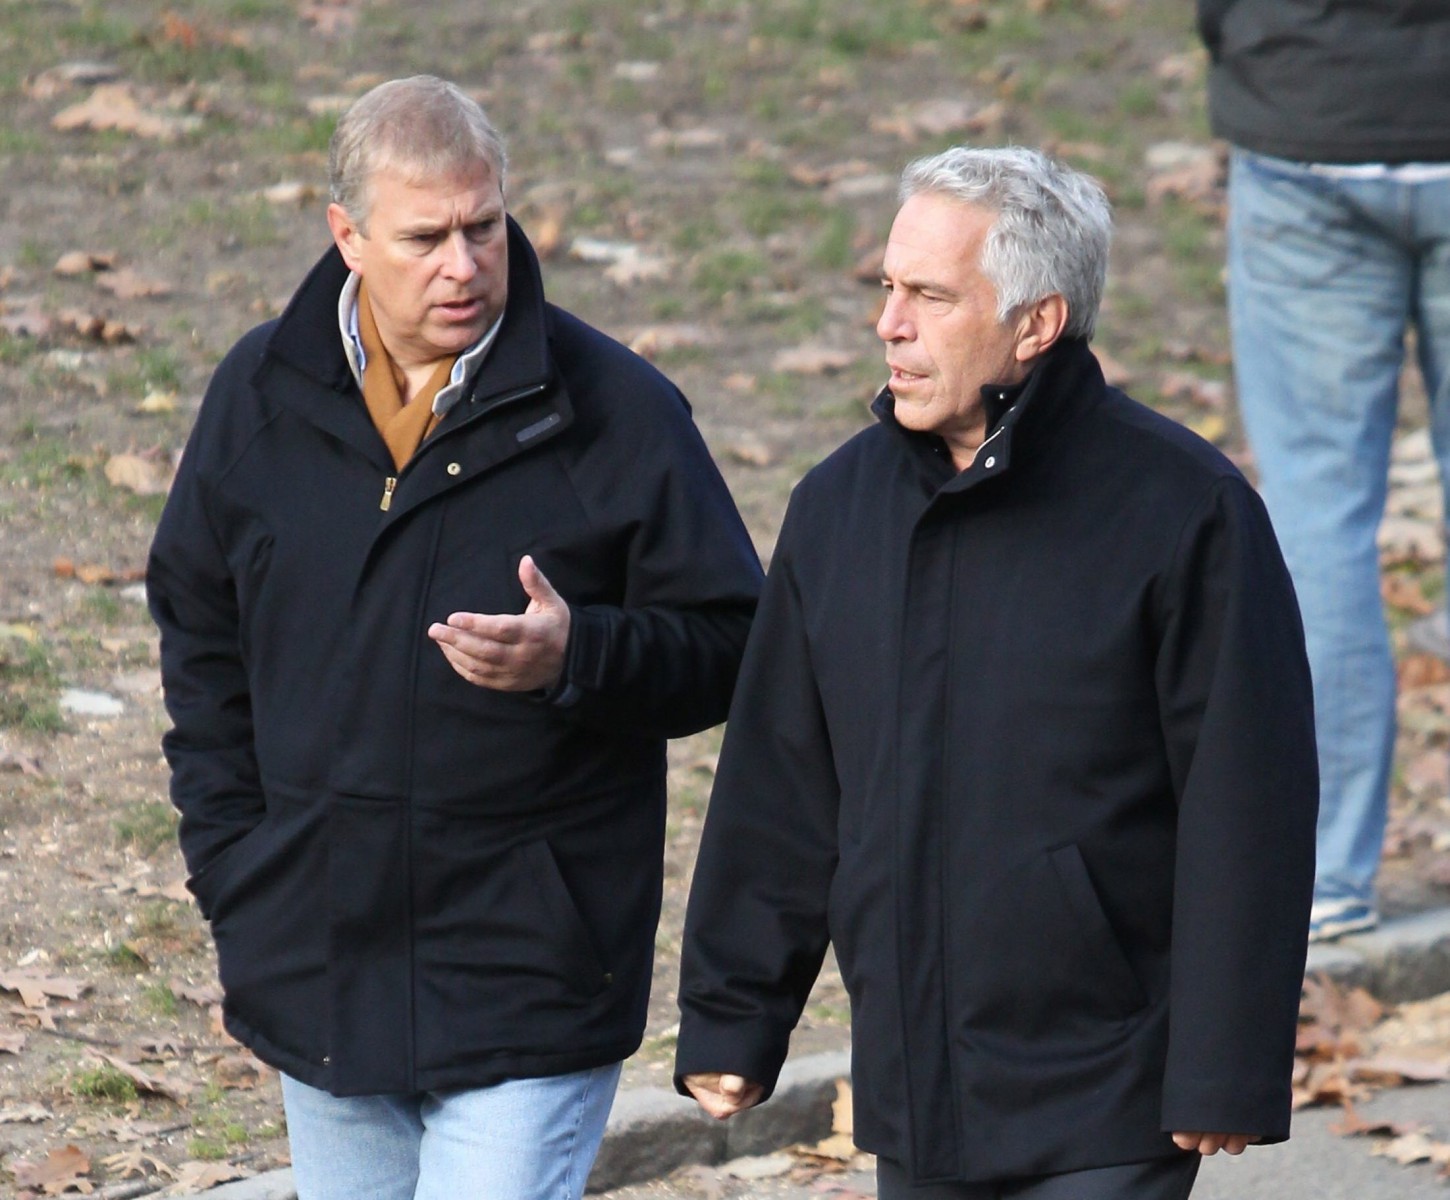 Prince Andrew, pictured with Jeffrey Epstein in New York in 2010